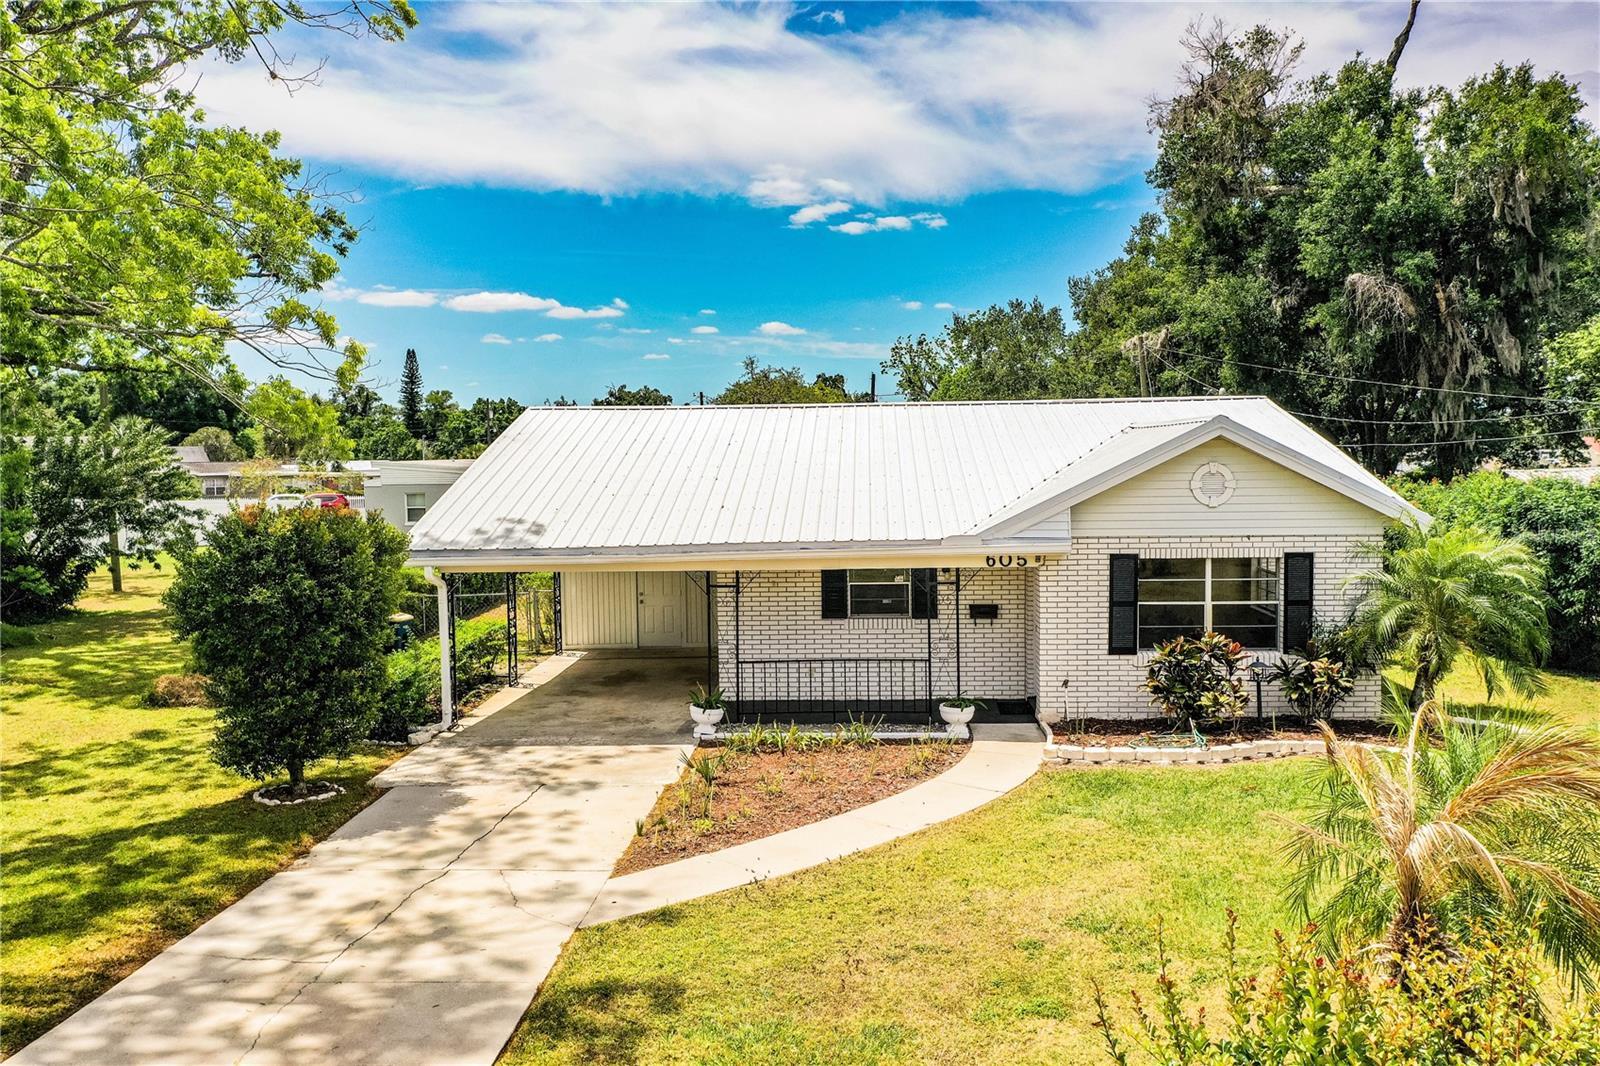 Photo one of 605 Formosa Ave Bartow FL 33830 | MLS L4943442